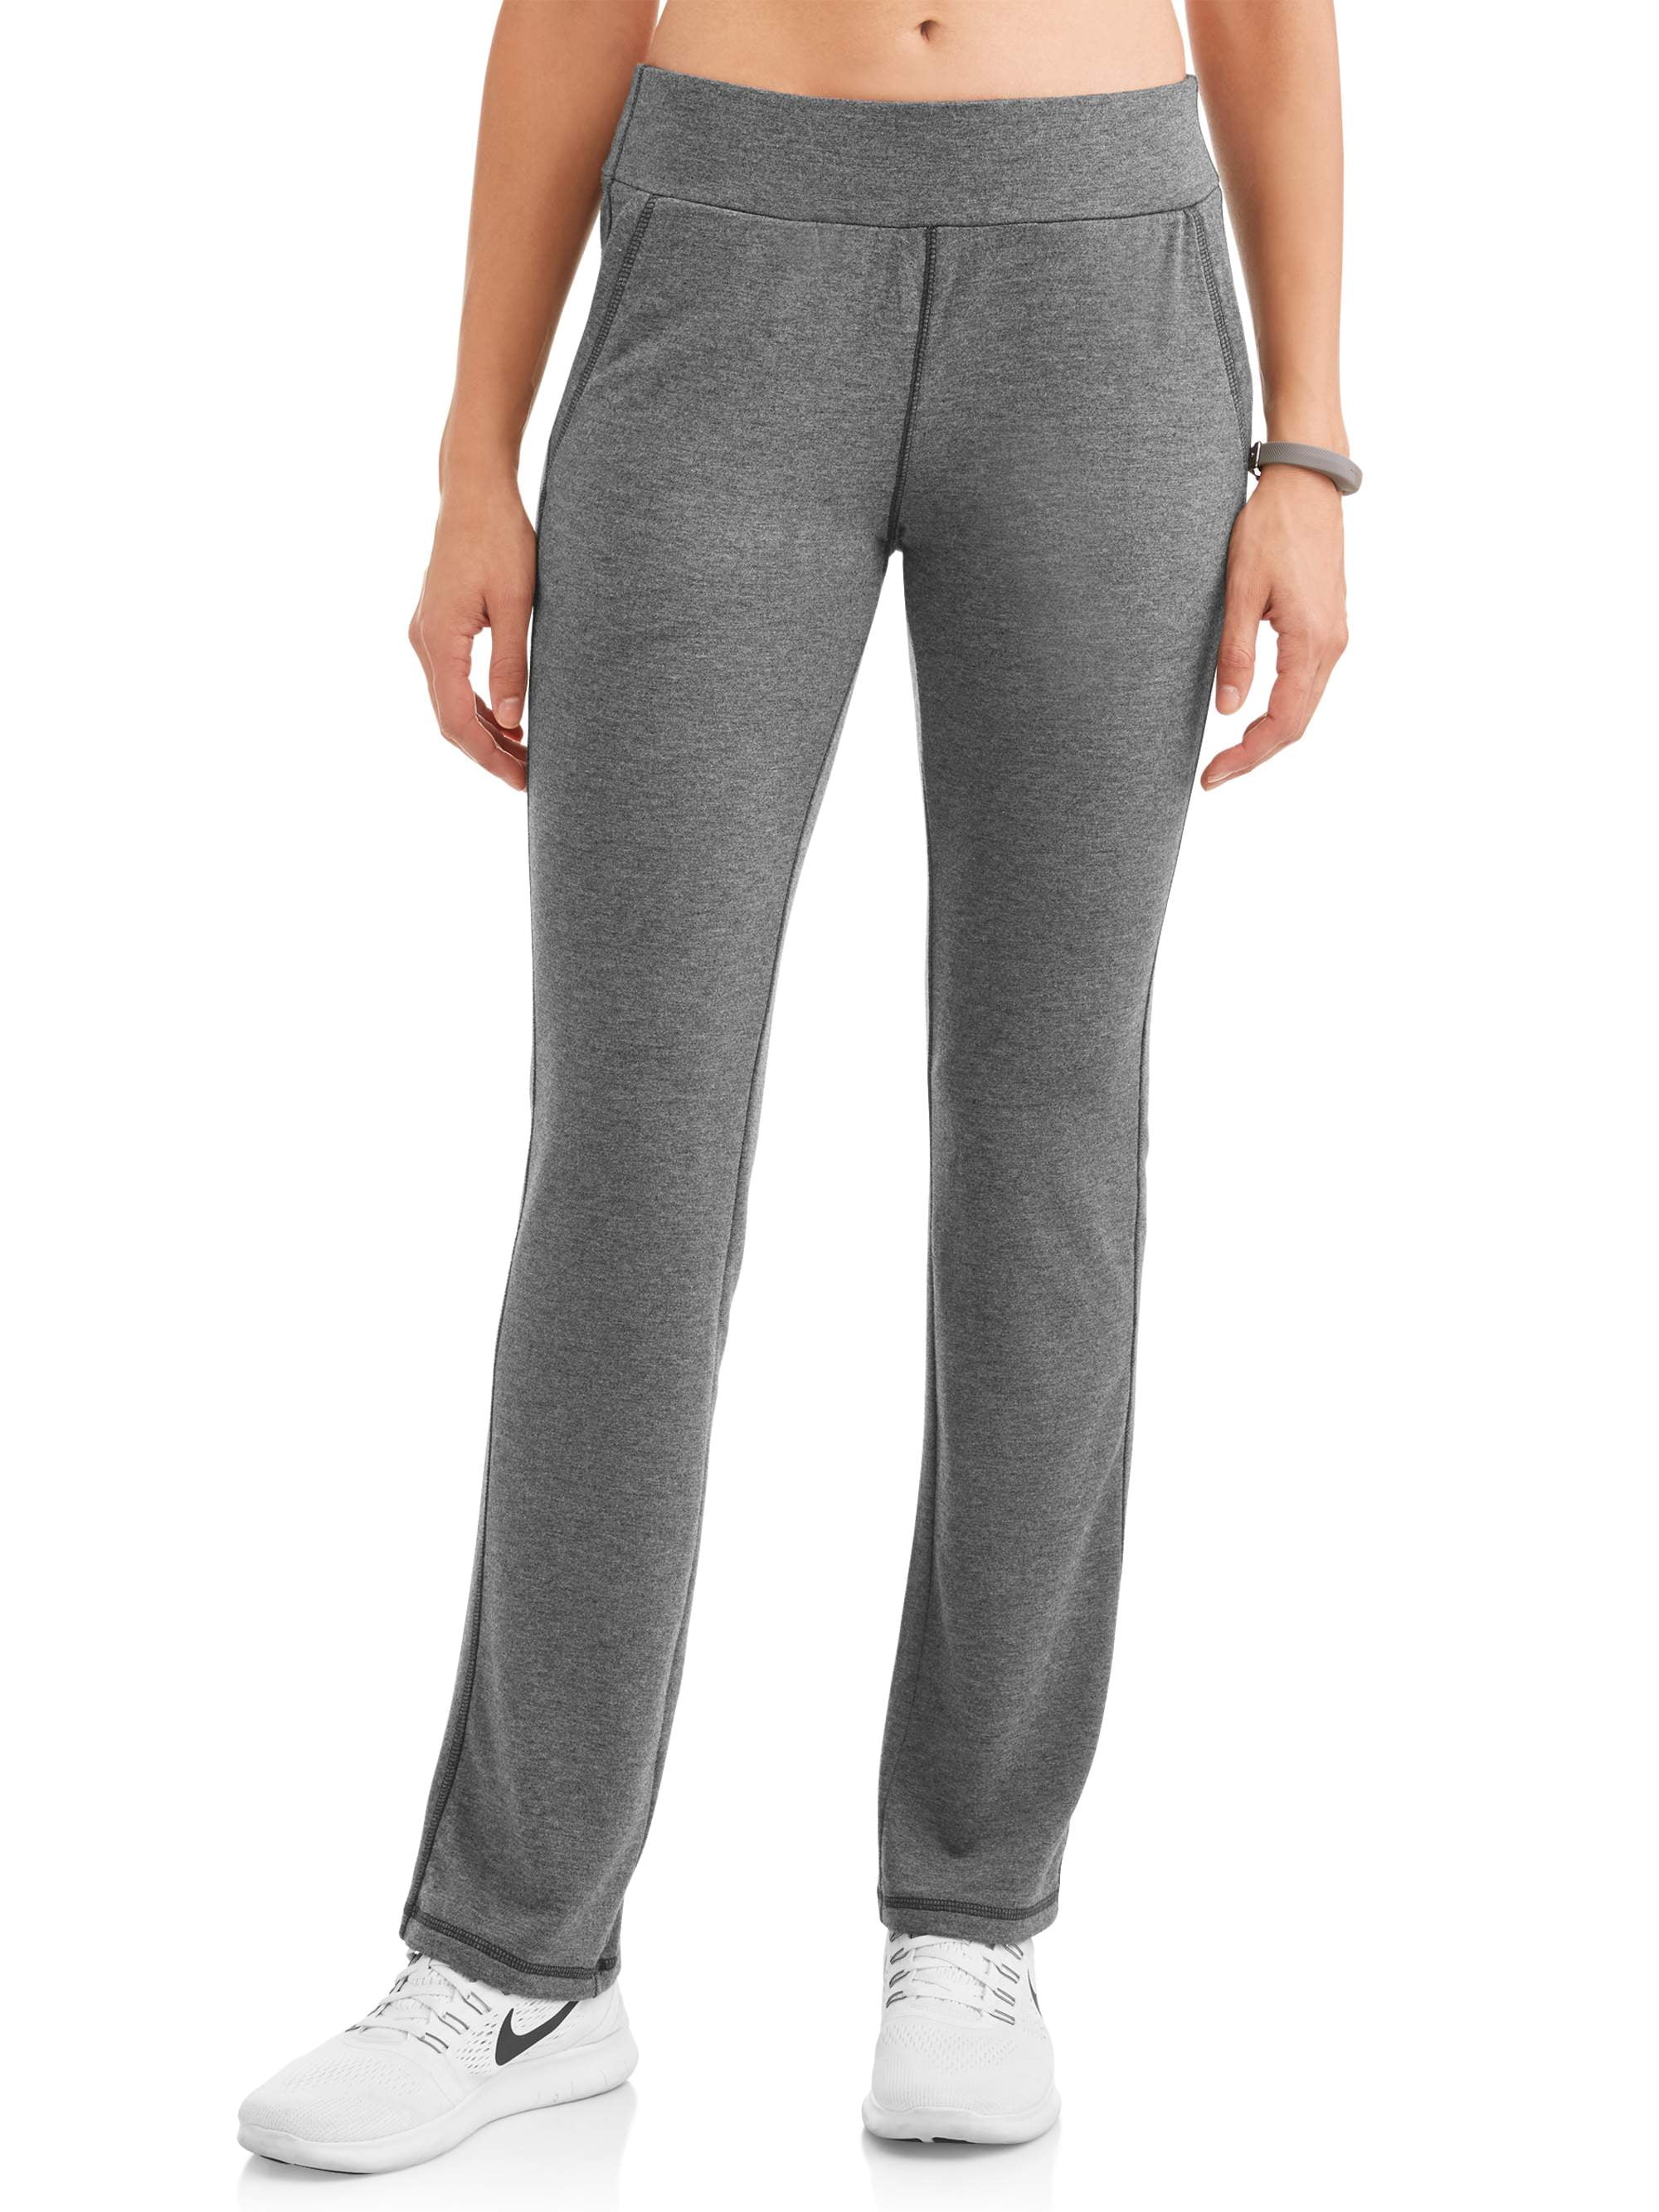 Athletic Works - Athletic Works Women's Athleisure French Terry ...